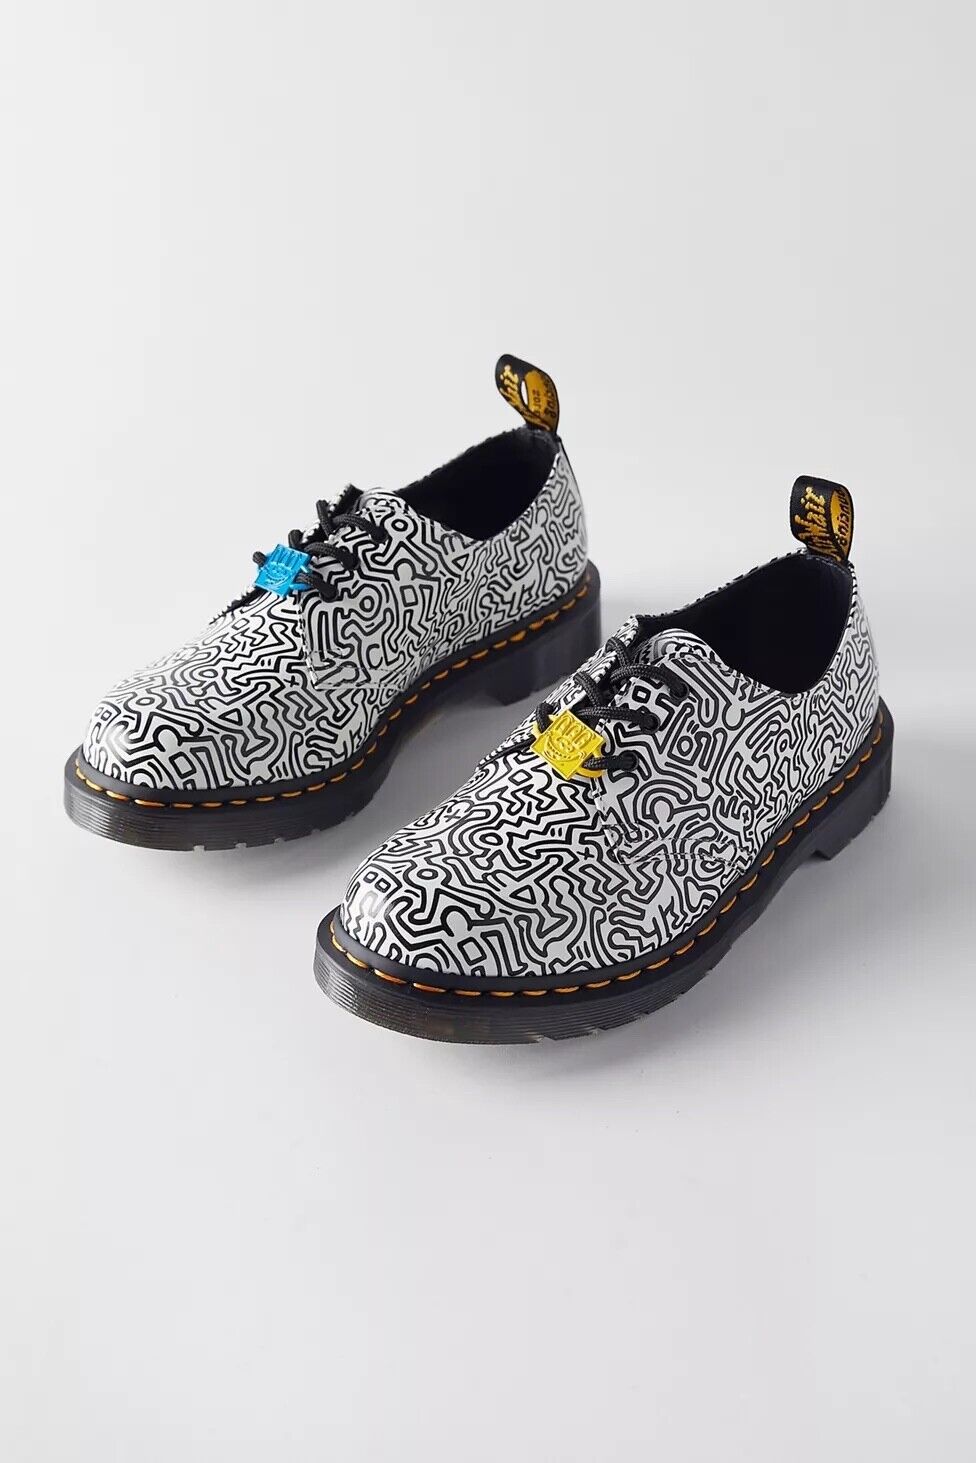 Pre-owned Keith Haring Dr. Martens X  1461 Printed Leather Oxford Us M 7 Us W 8 Uk 6 Eu 39 In Black And White